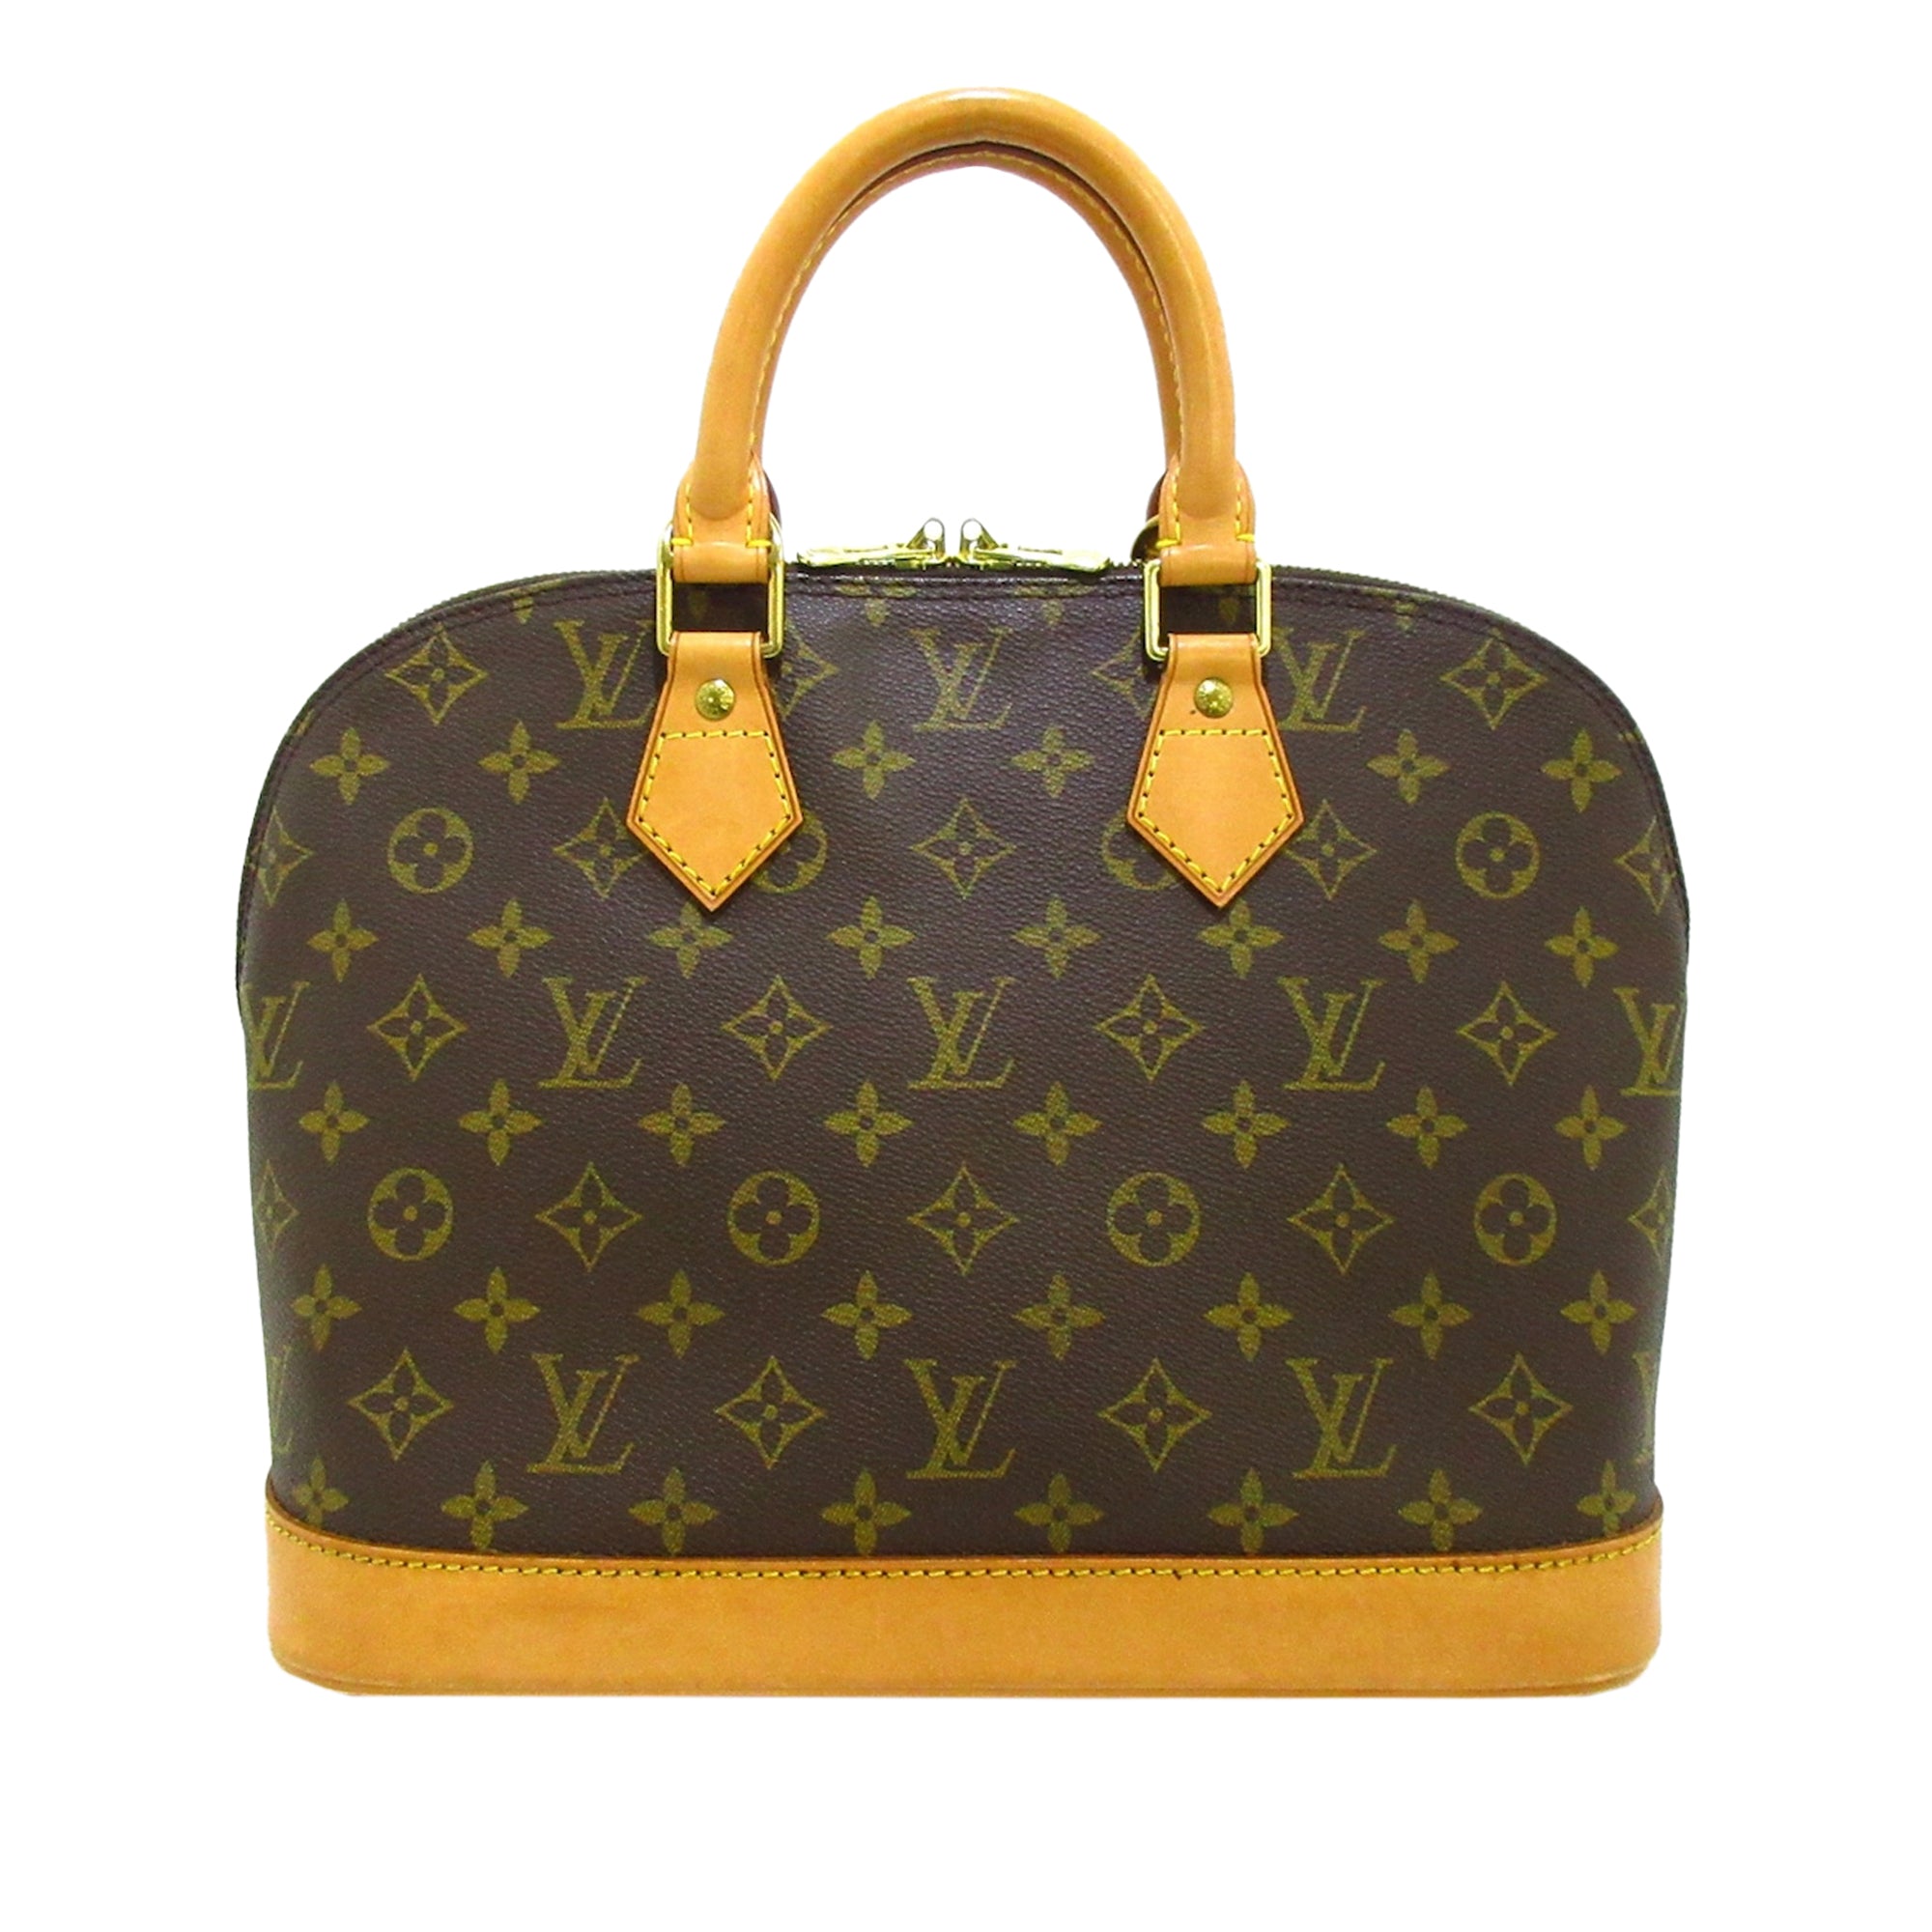 Louis Vuitton Twist shoulder bag in blue and pink leather